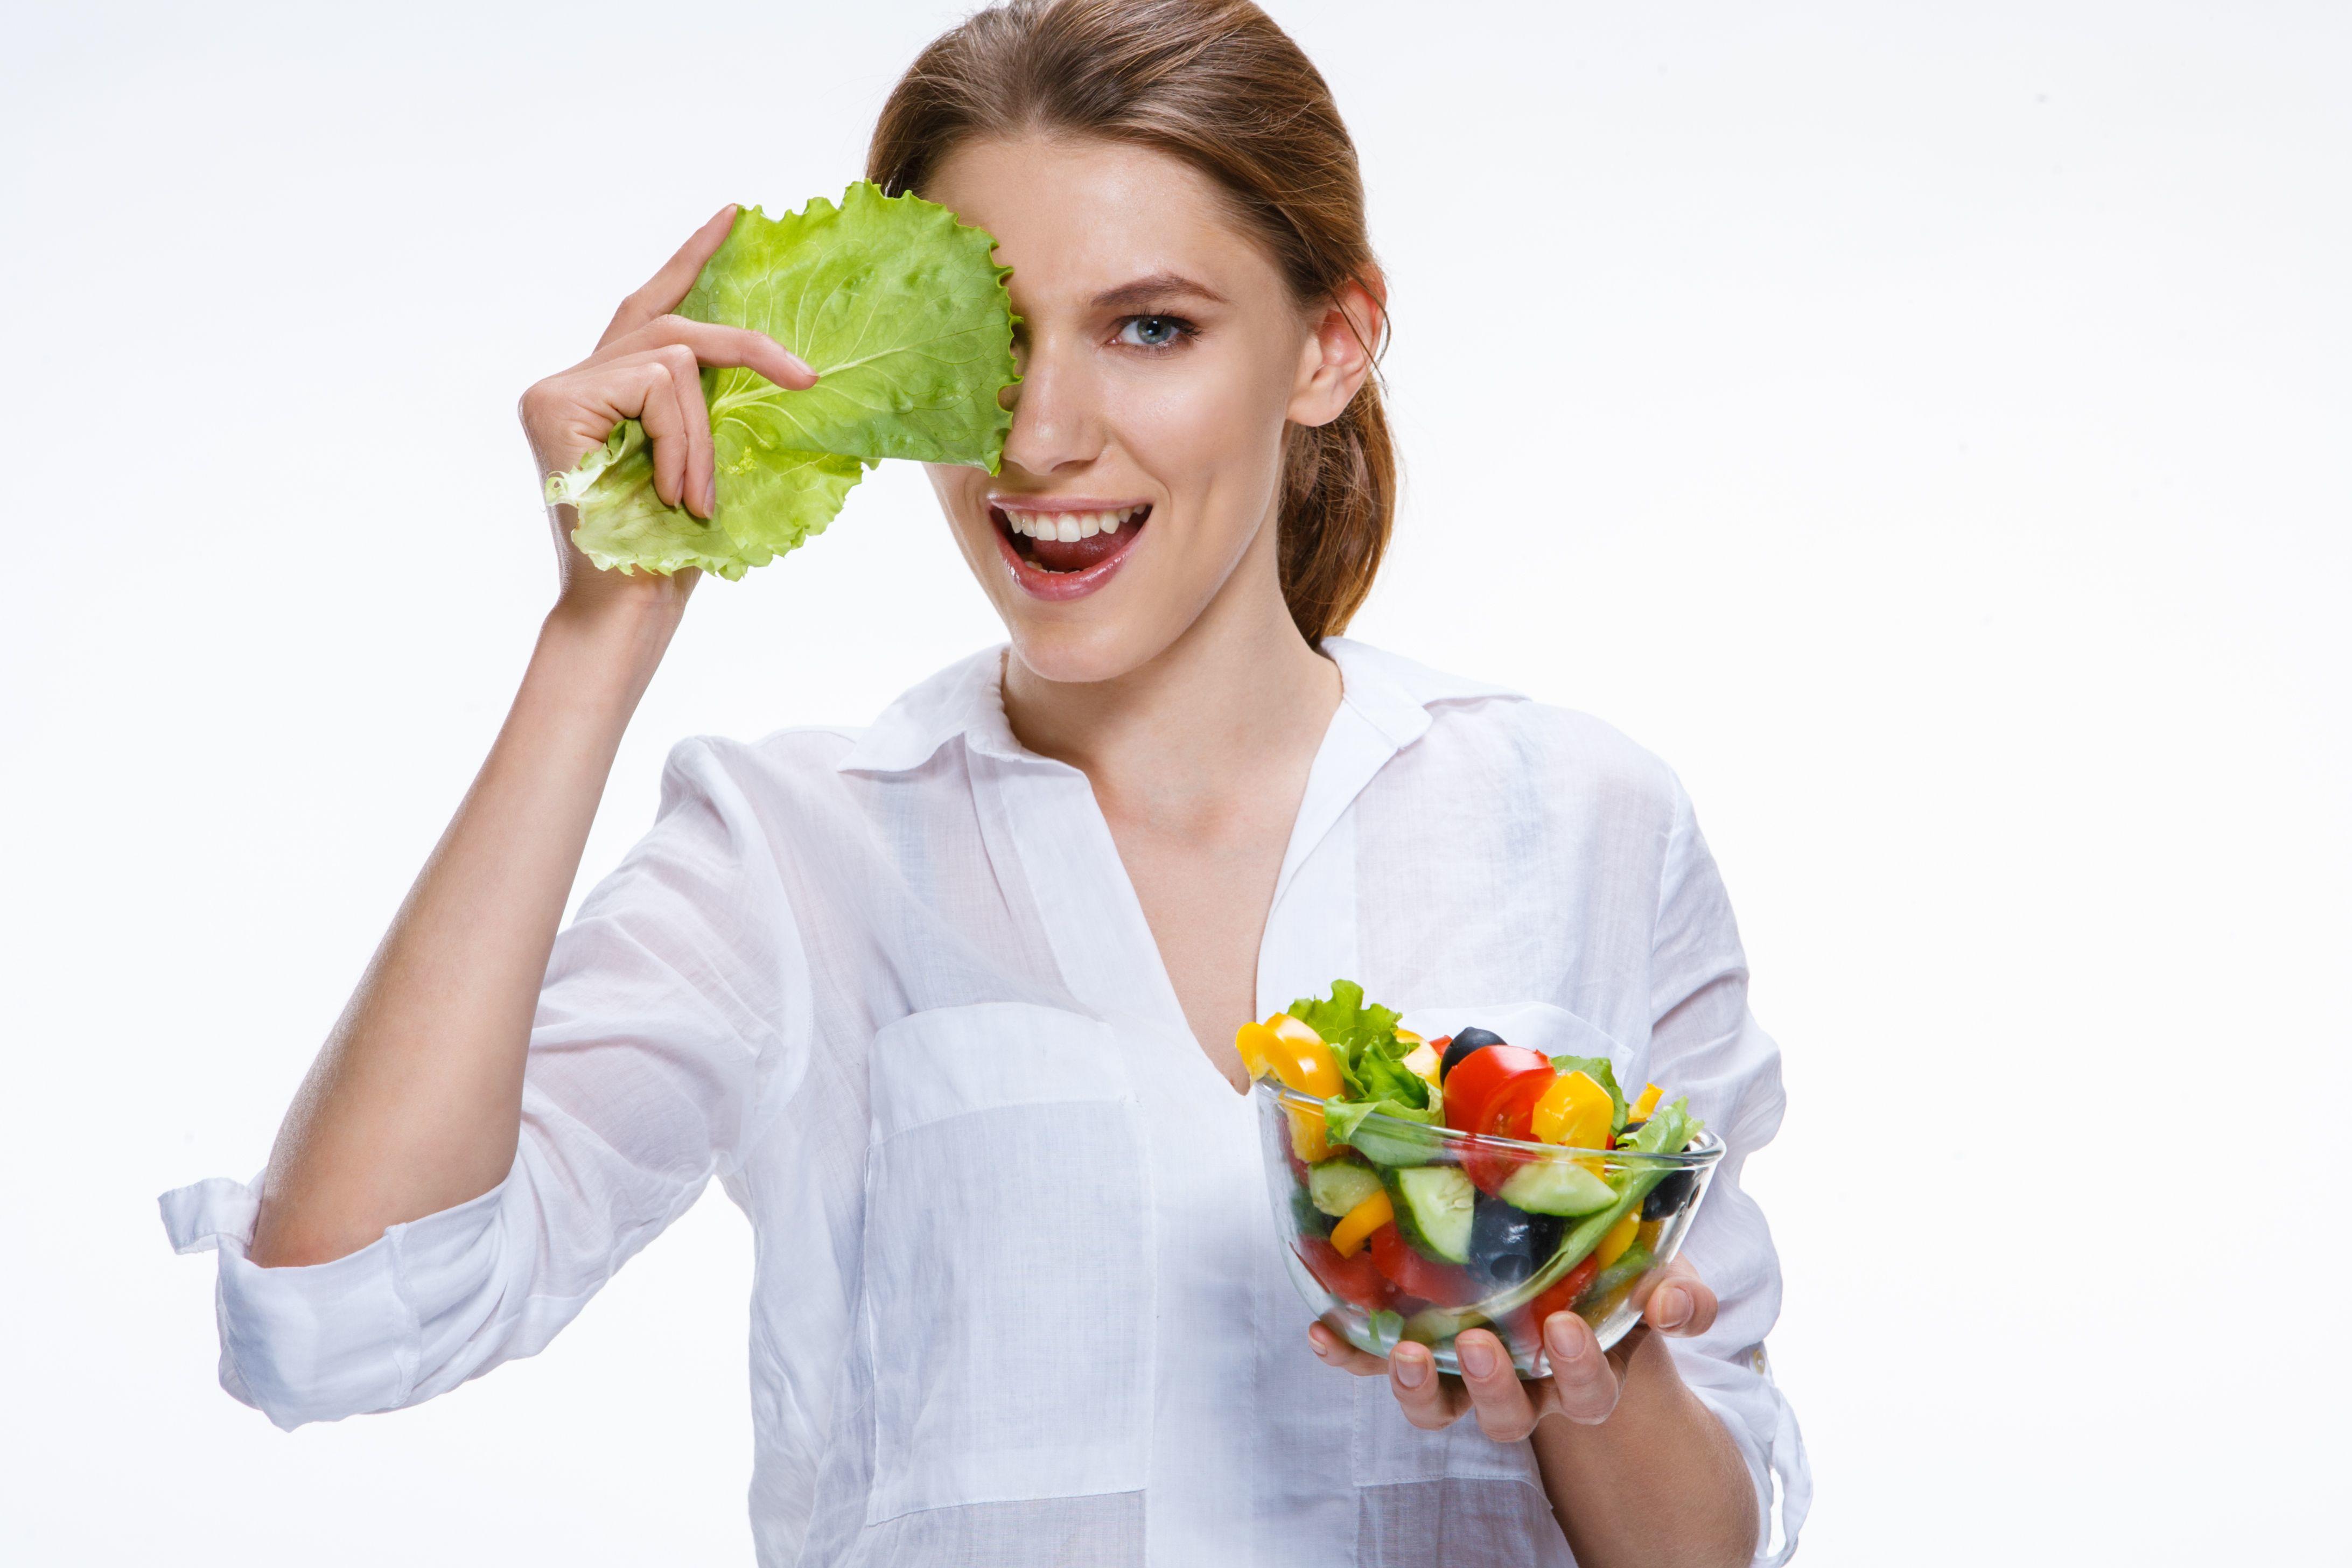 Anti-Ageing Diet Plans For Women